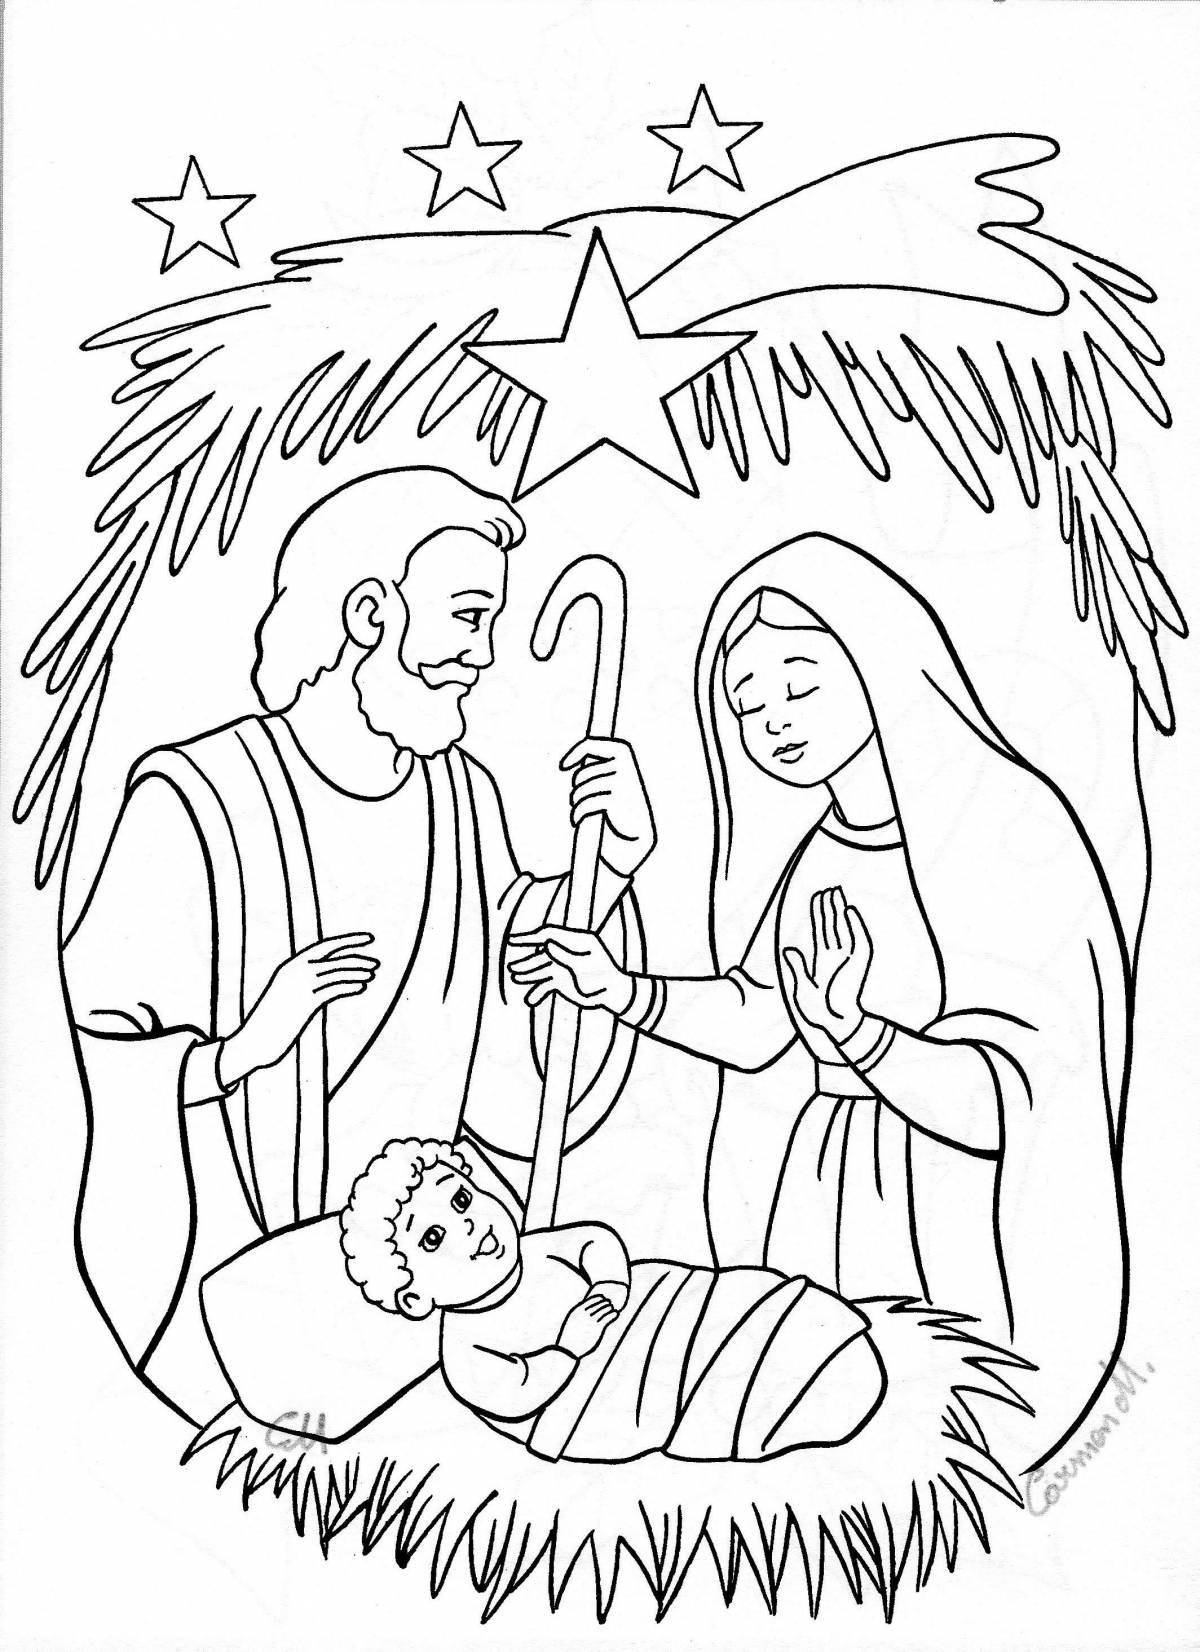 Exquisite merry christmas baby coloring book